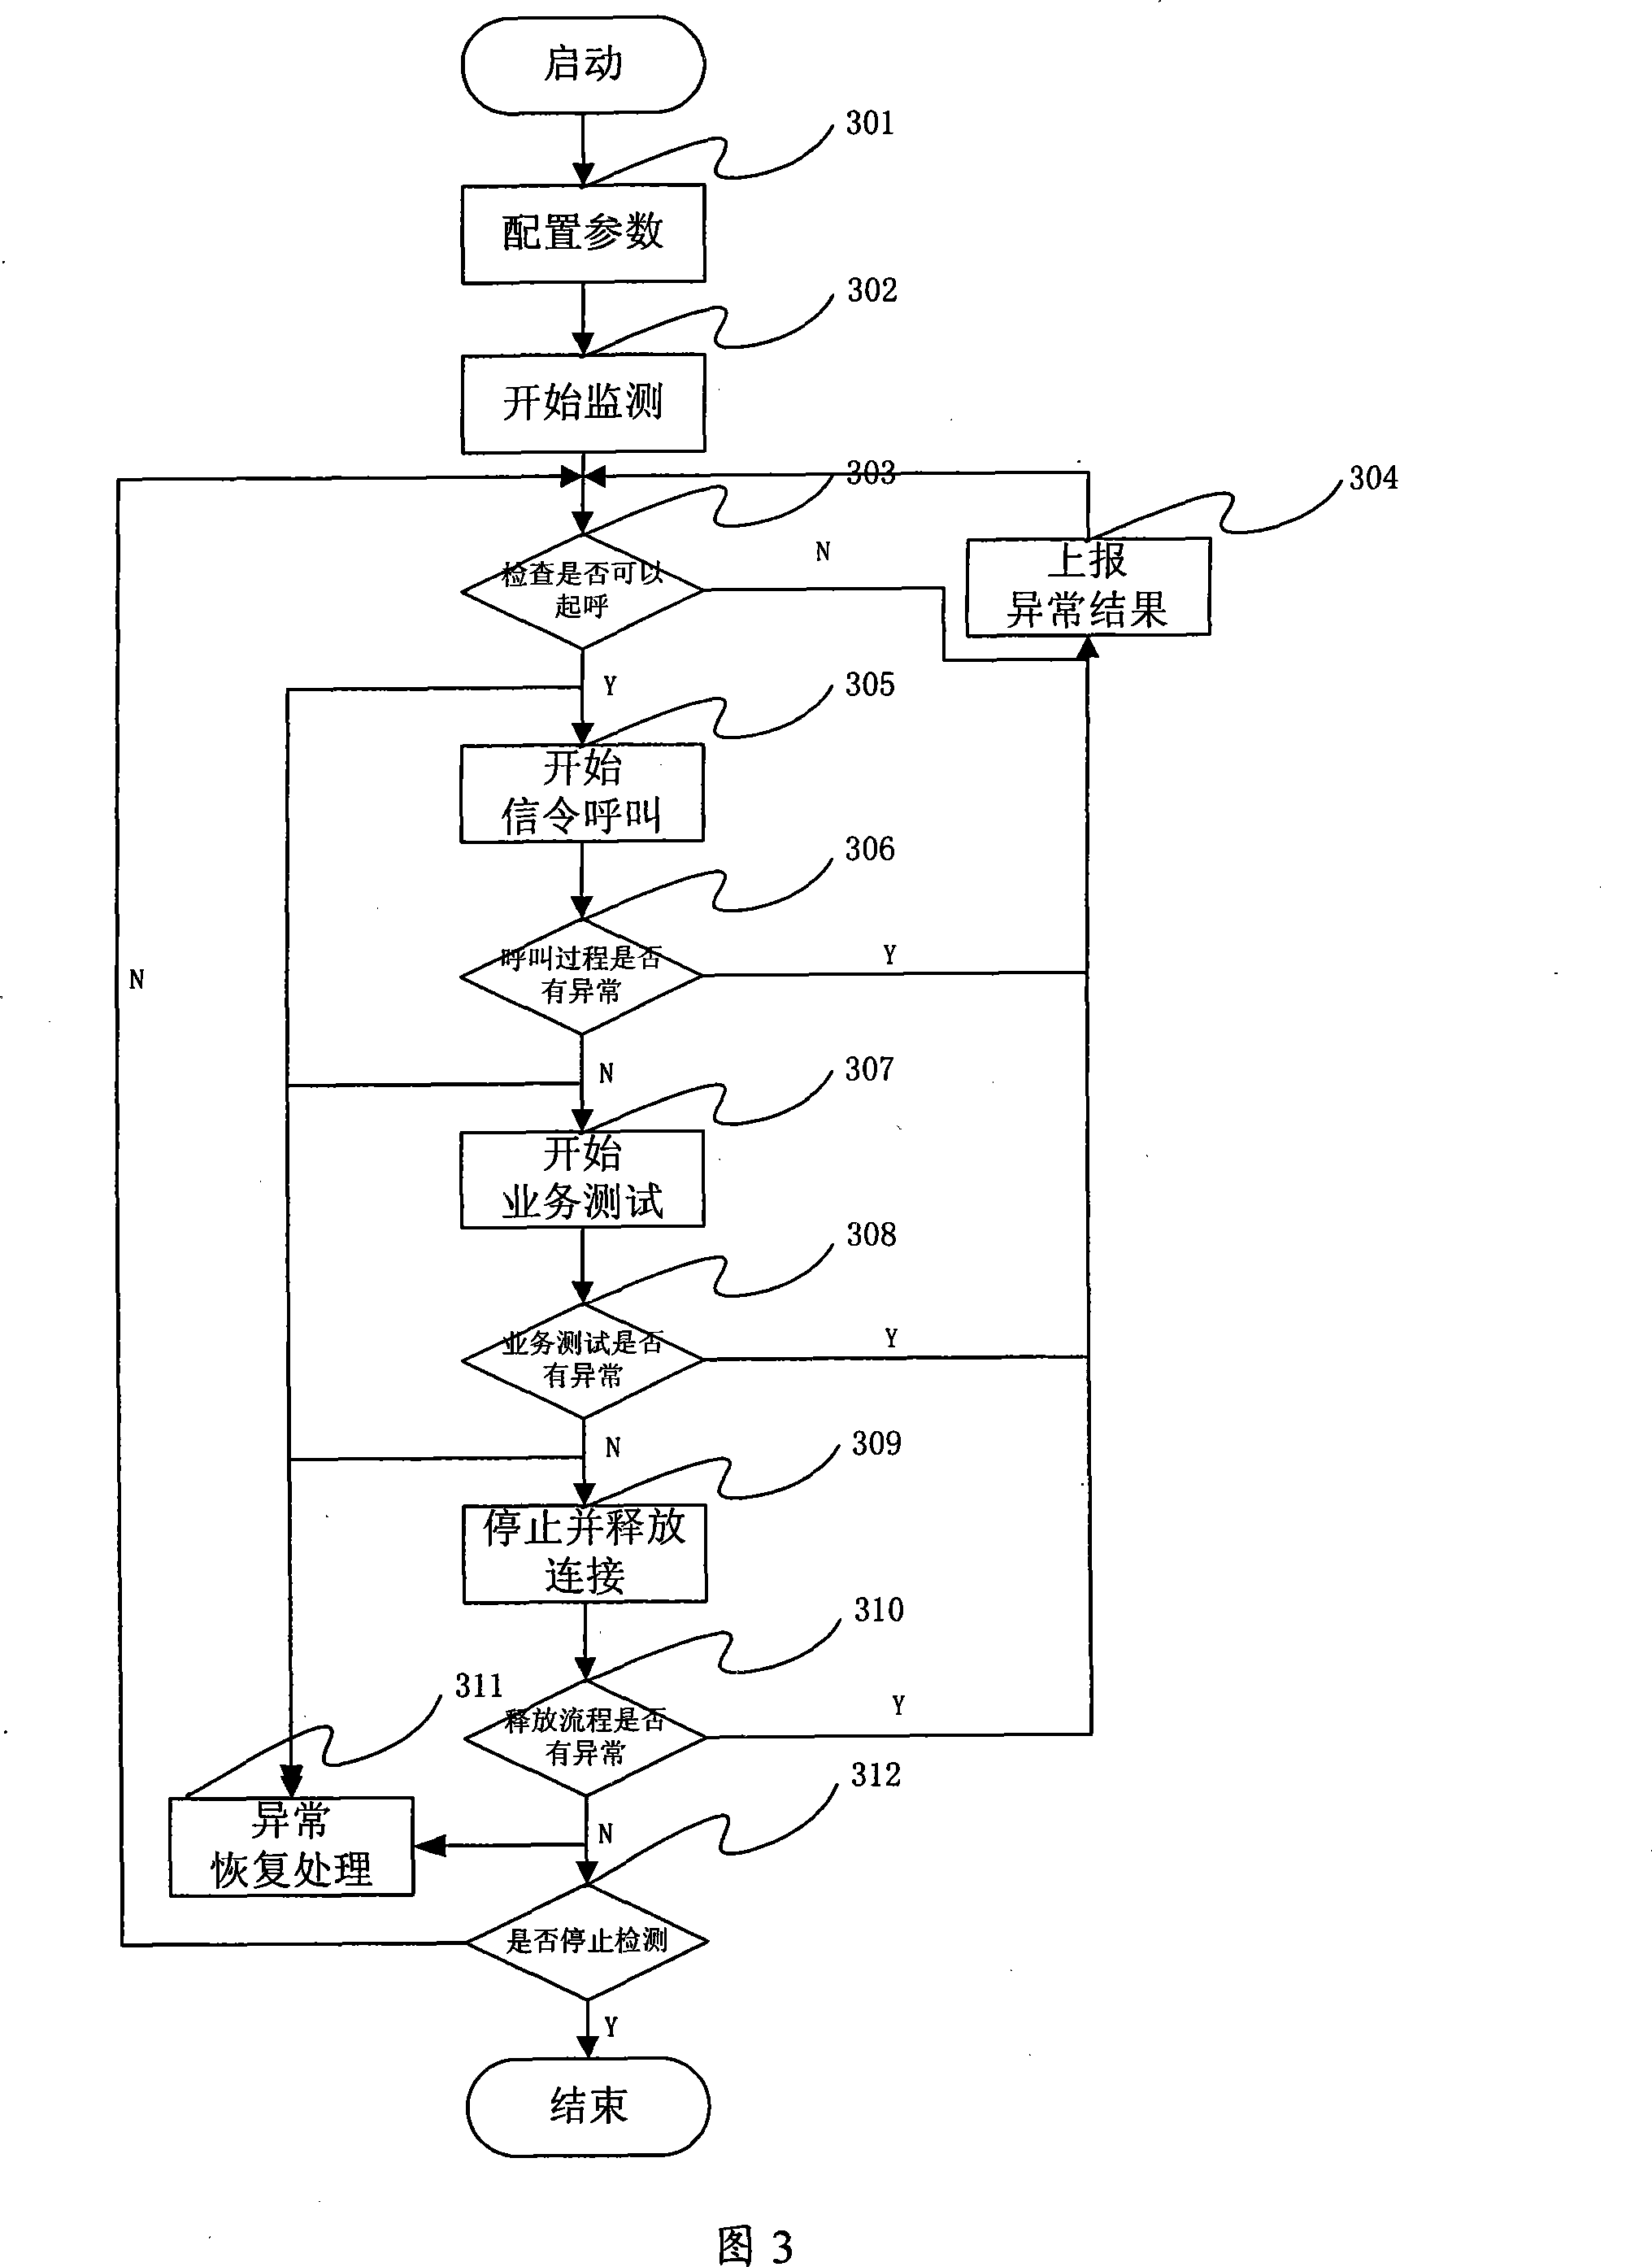 Apparatus and method for mobile communication service fault automatic detection